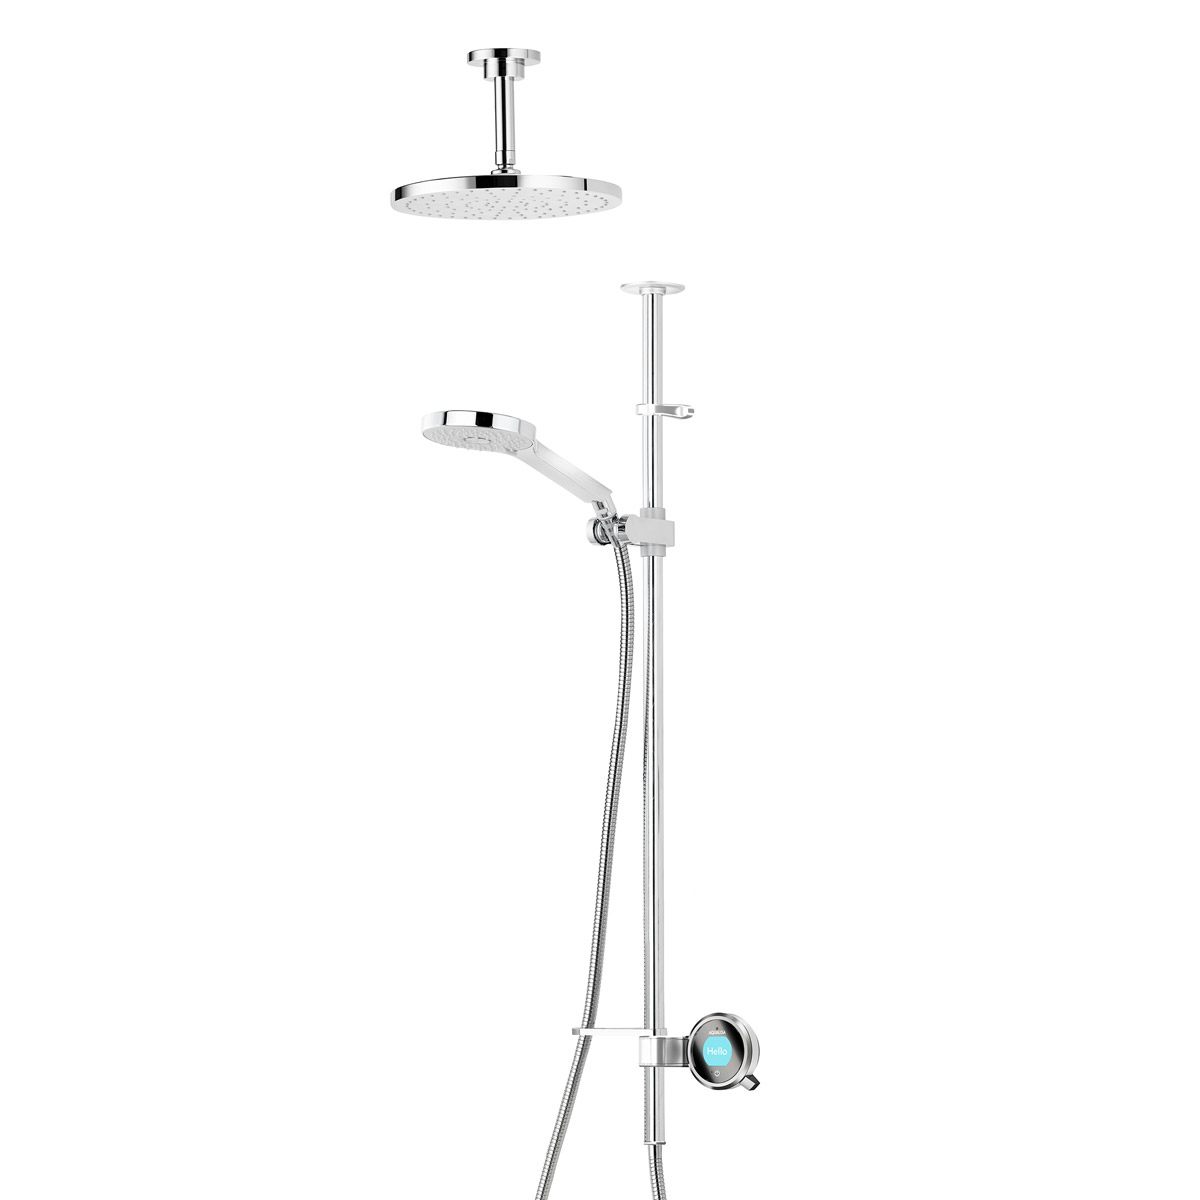 Aqualisa Q exposed digital shower pumped with slider rail and ceiling arm